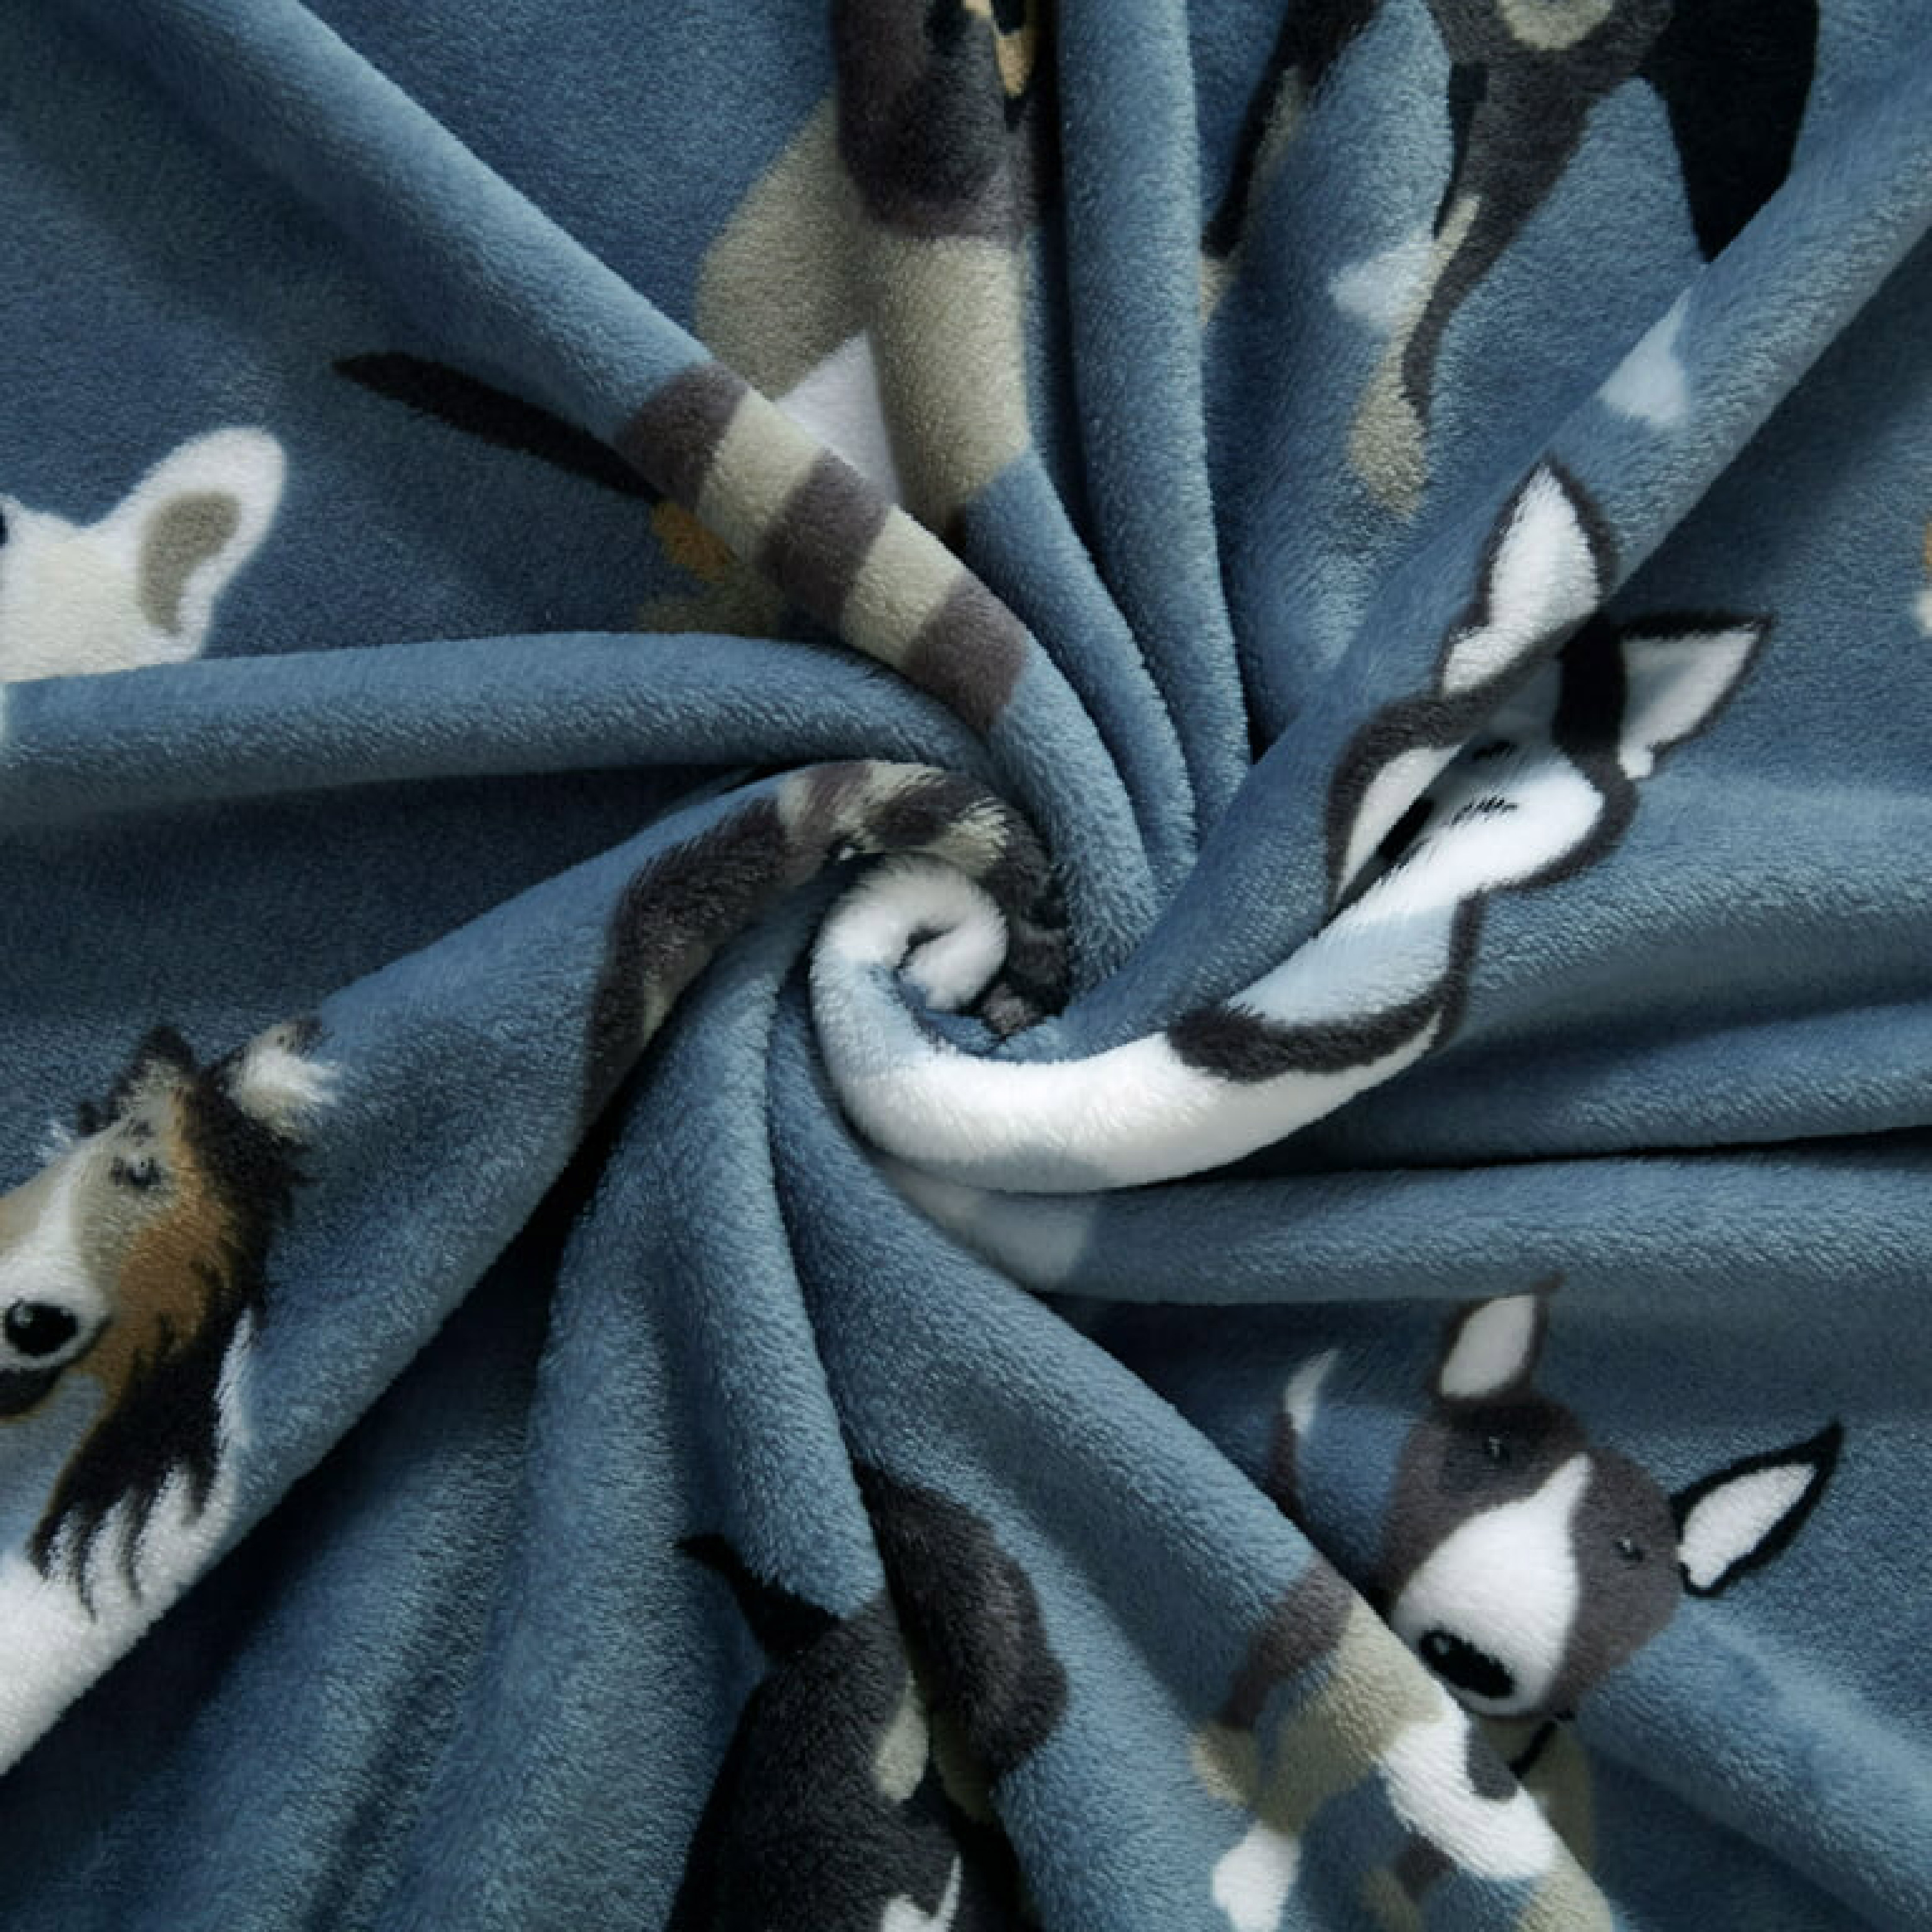 Mainstays Blue Dogs Plush Throw Blanket 50" x 60" - image 5 of 6